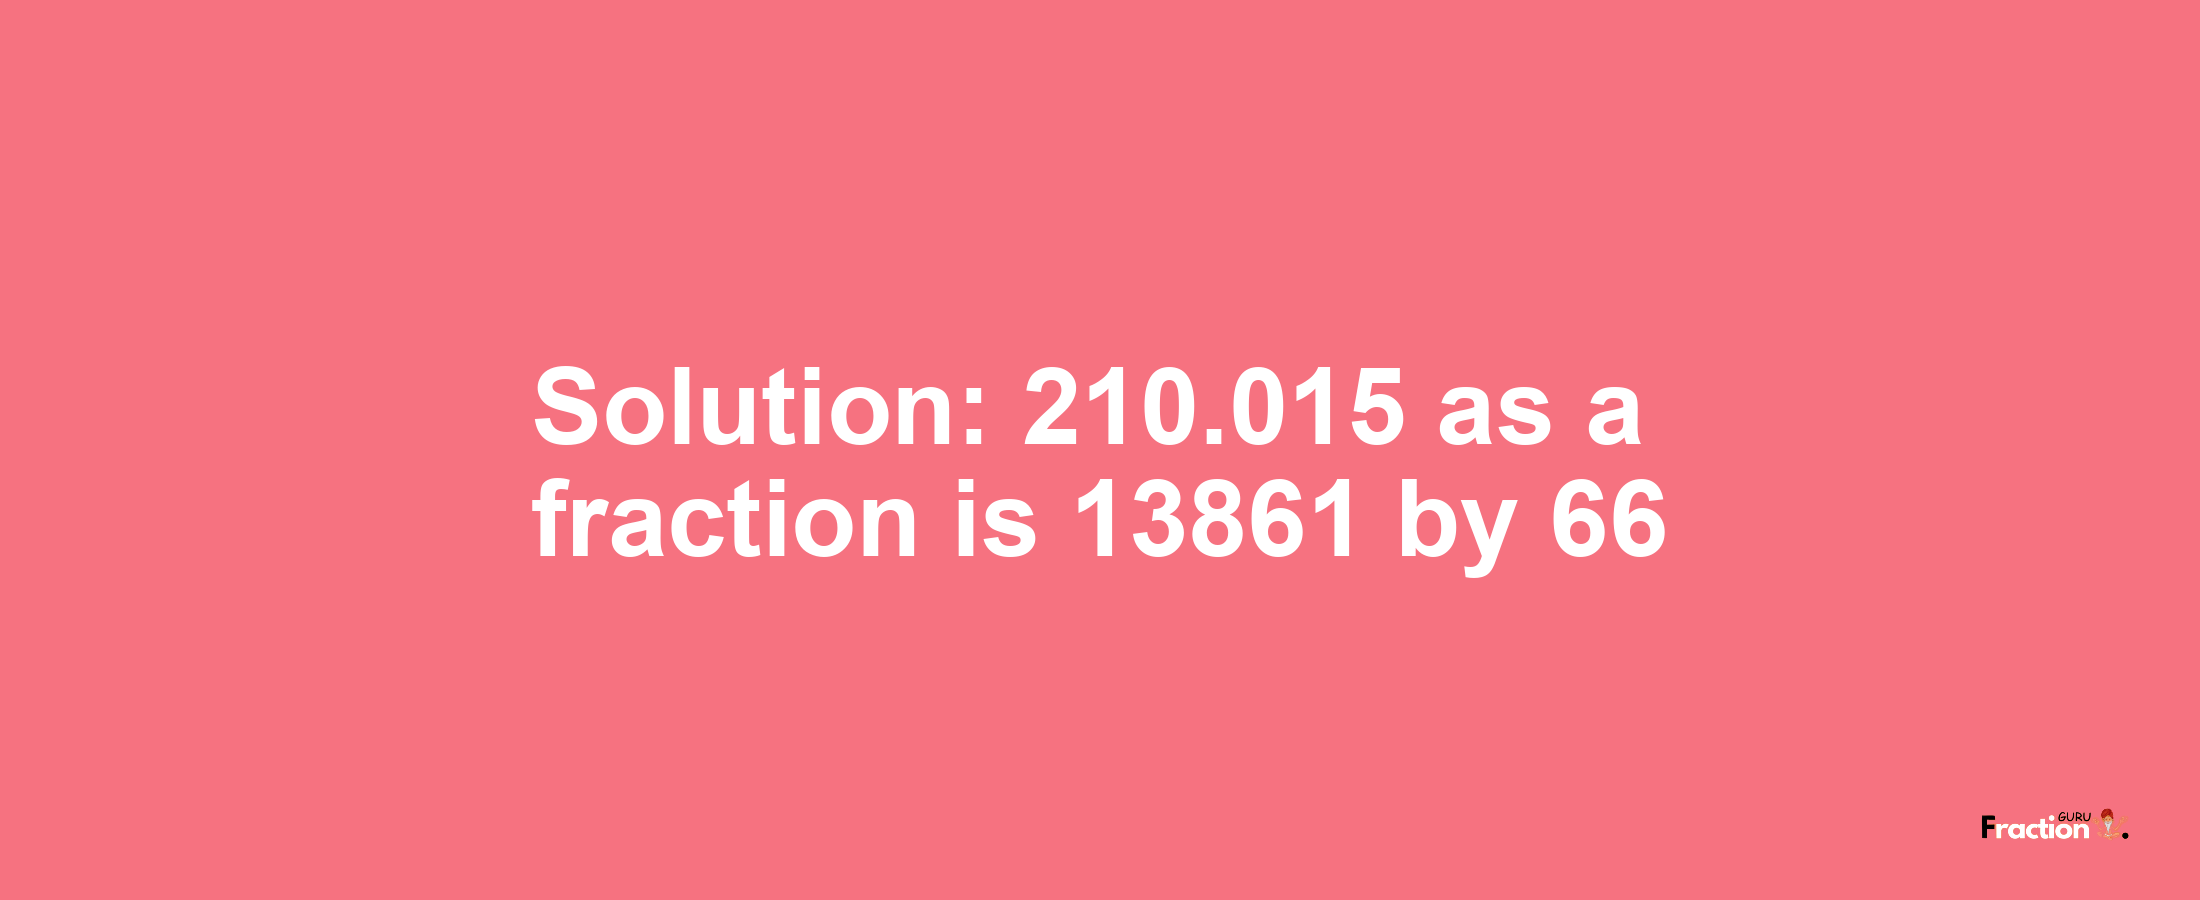 Solution:210.015 as a fraction is 13861/66